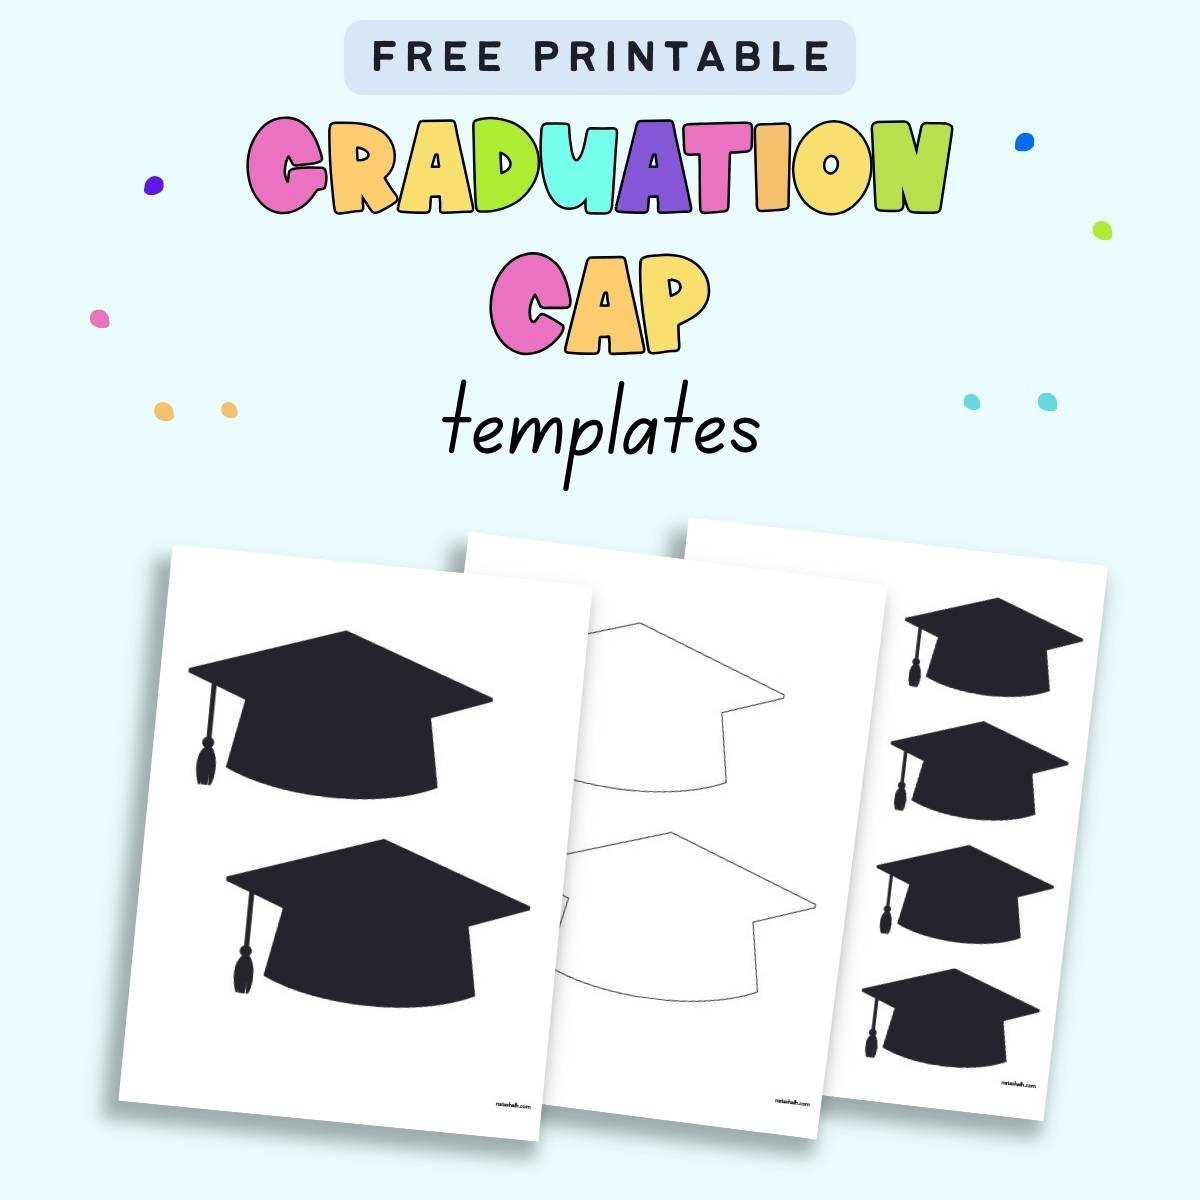 Text "free printable graduation cap templates" with a preview of three pages of printable template and outline